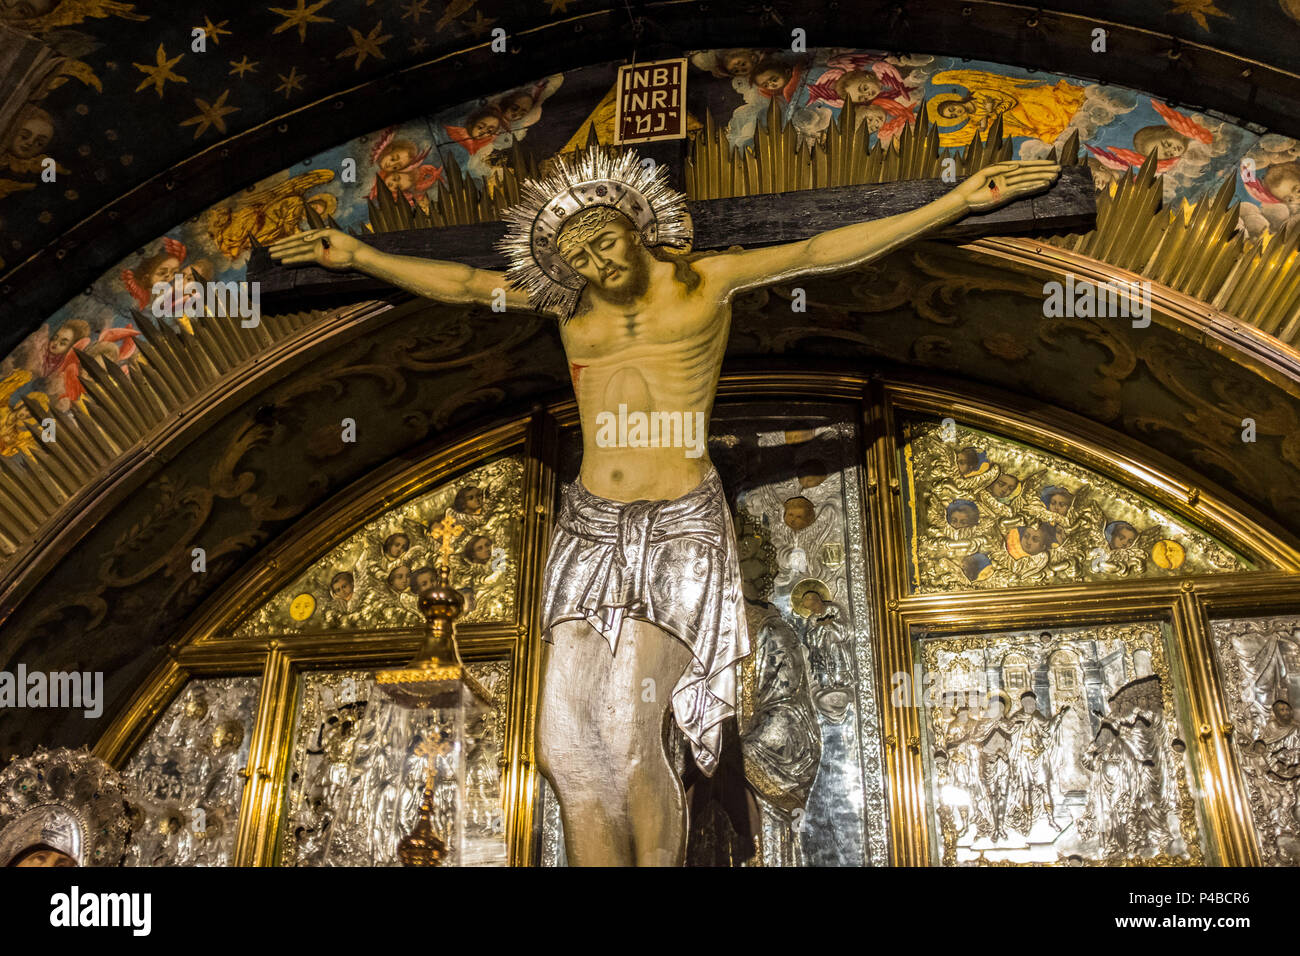 The Altar of the Crucifixion, Church of the Holy Sepulchre, Jerusalem, Israel, Middle East Stock Photo